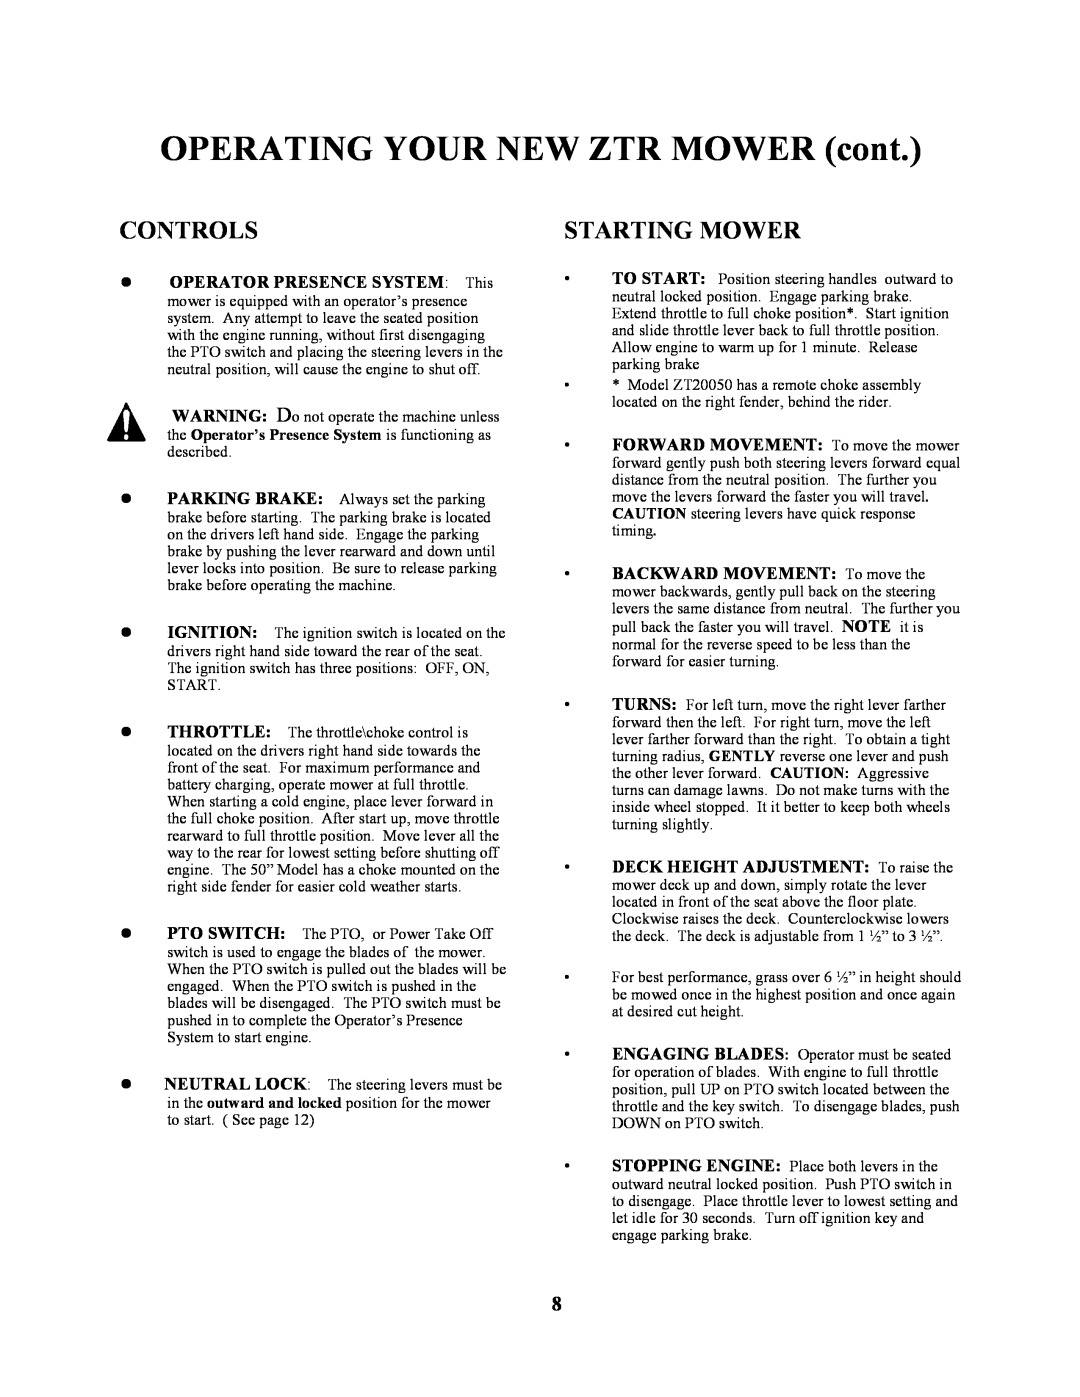 Swisher ZT1436, ZT17542B, ZT1842, ZT20050 owner manual OPERATING YOUR NEW ZTR MOWER cont, Controls, Starting Mower 